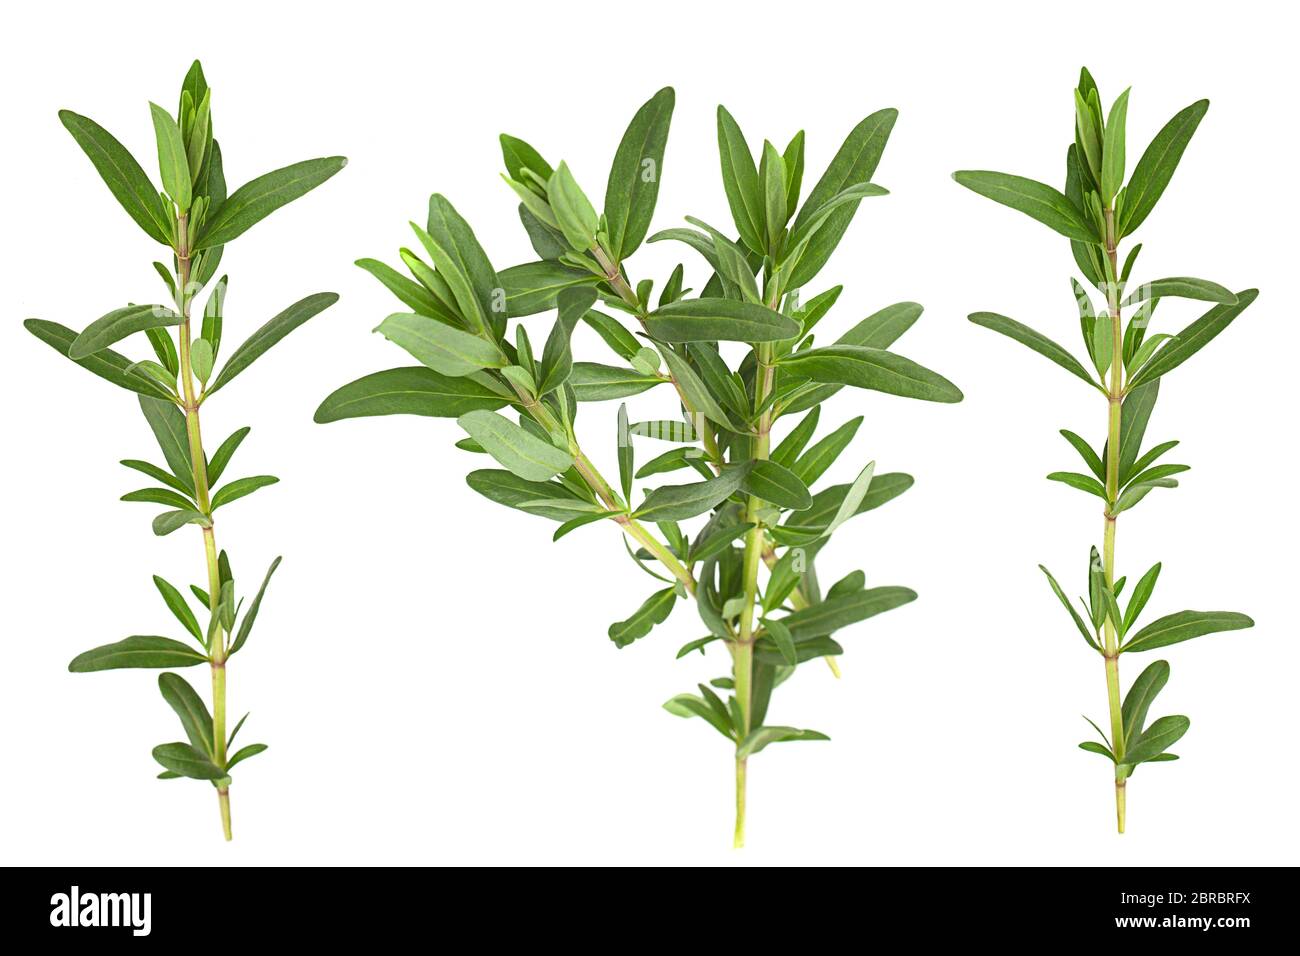 Tarragon leaf bunch set closeup isolated on white background Stock Photo